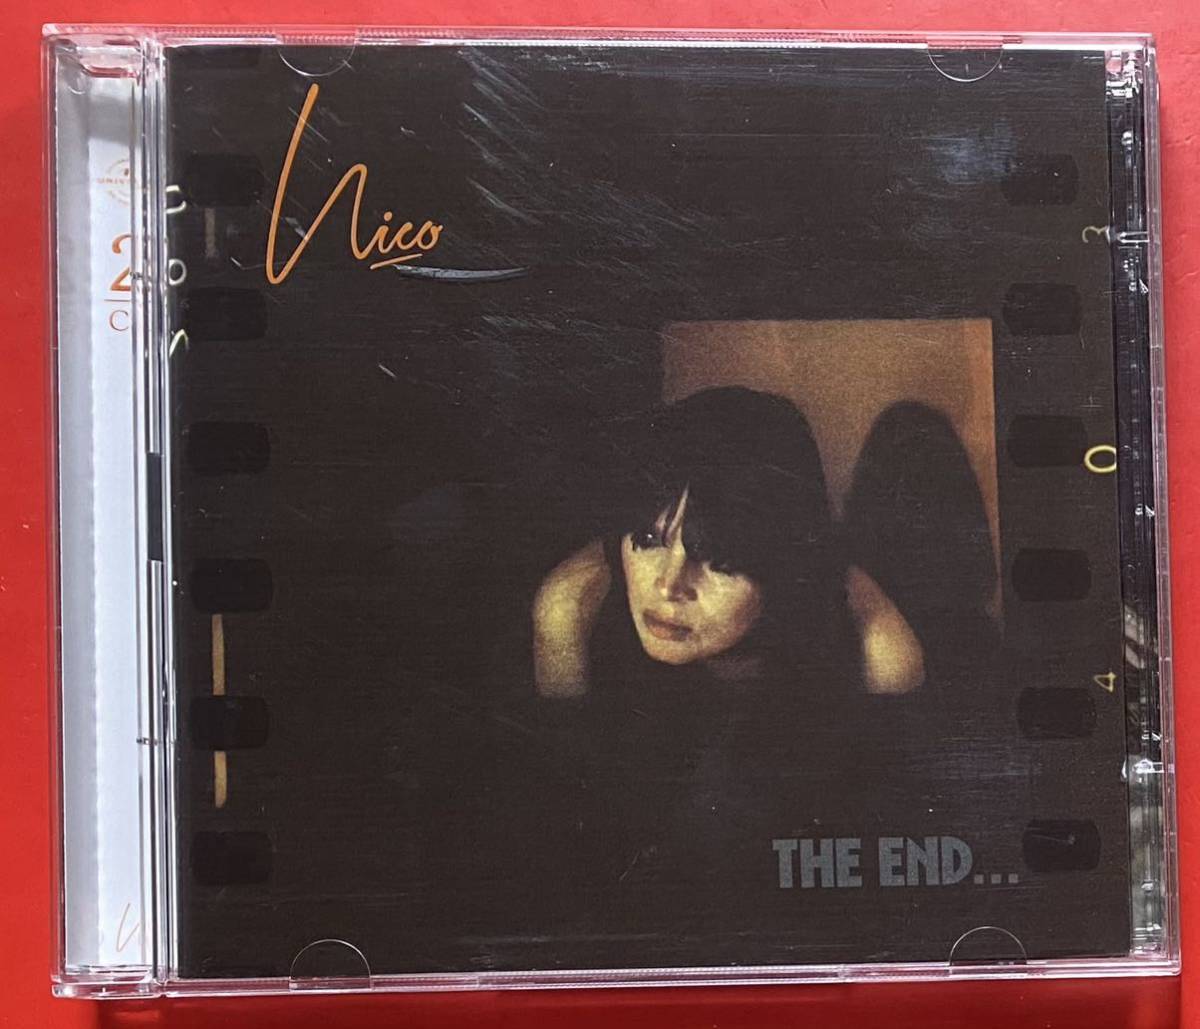 【2CD】NICO「THE END」ニコ 輸入盤 盤面良好 [09131101]_画像1